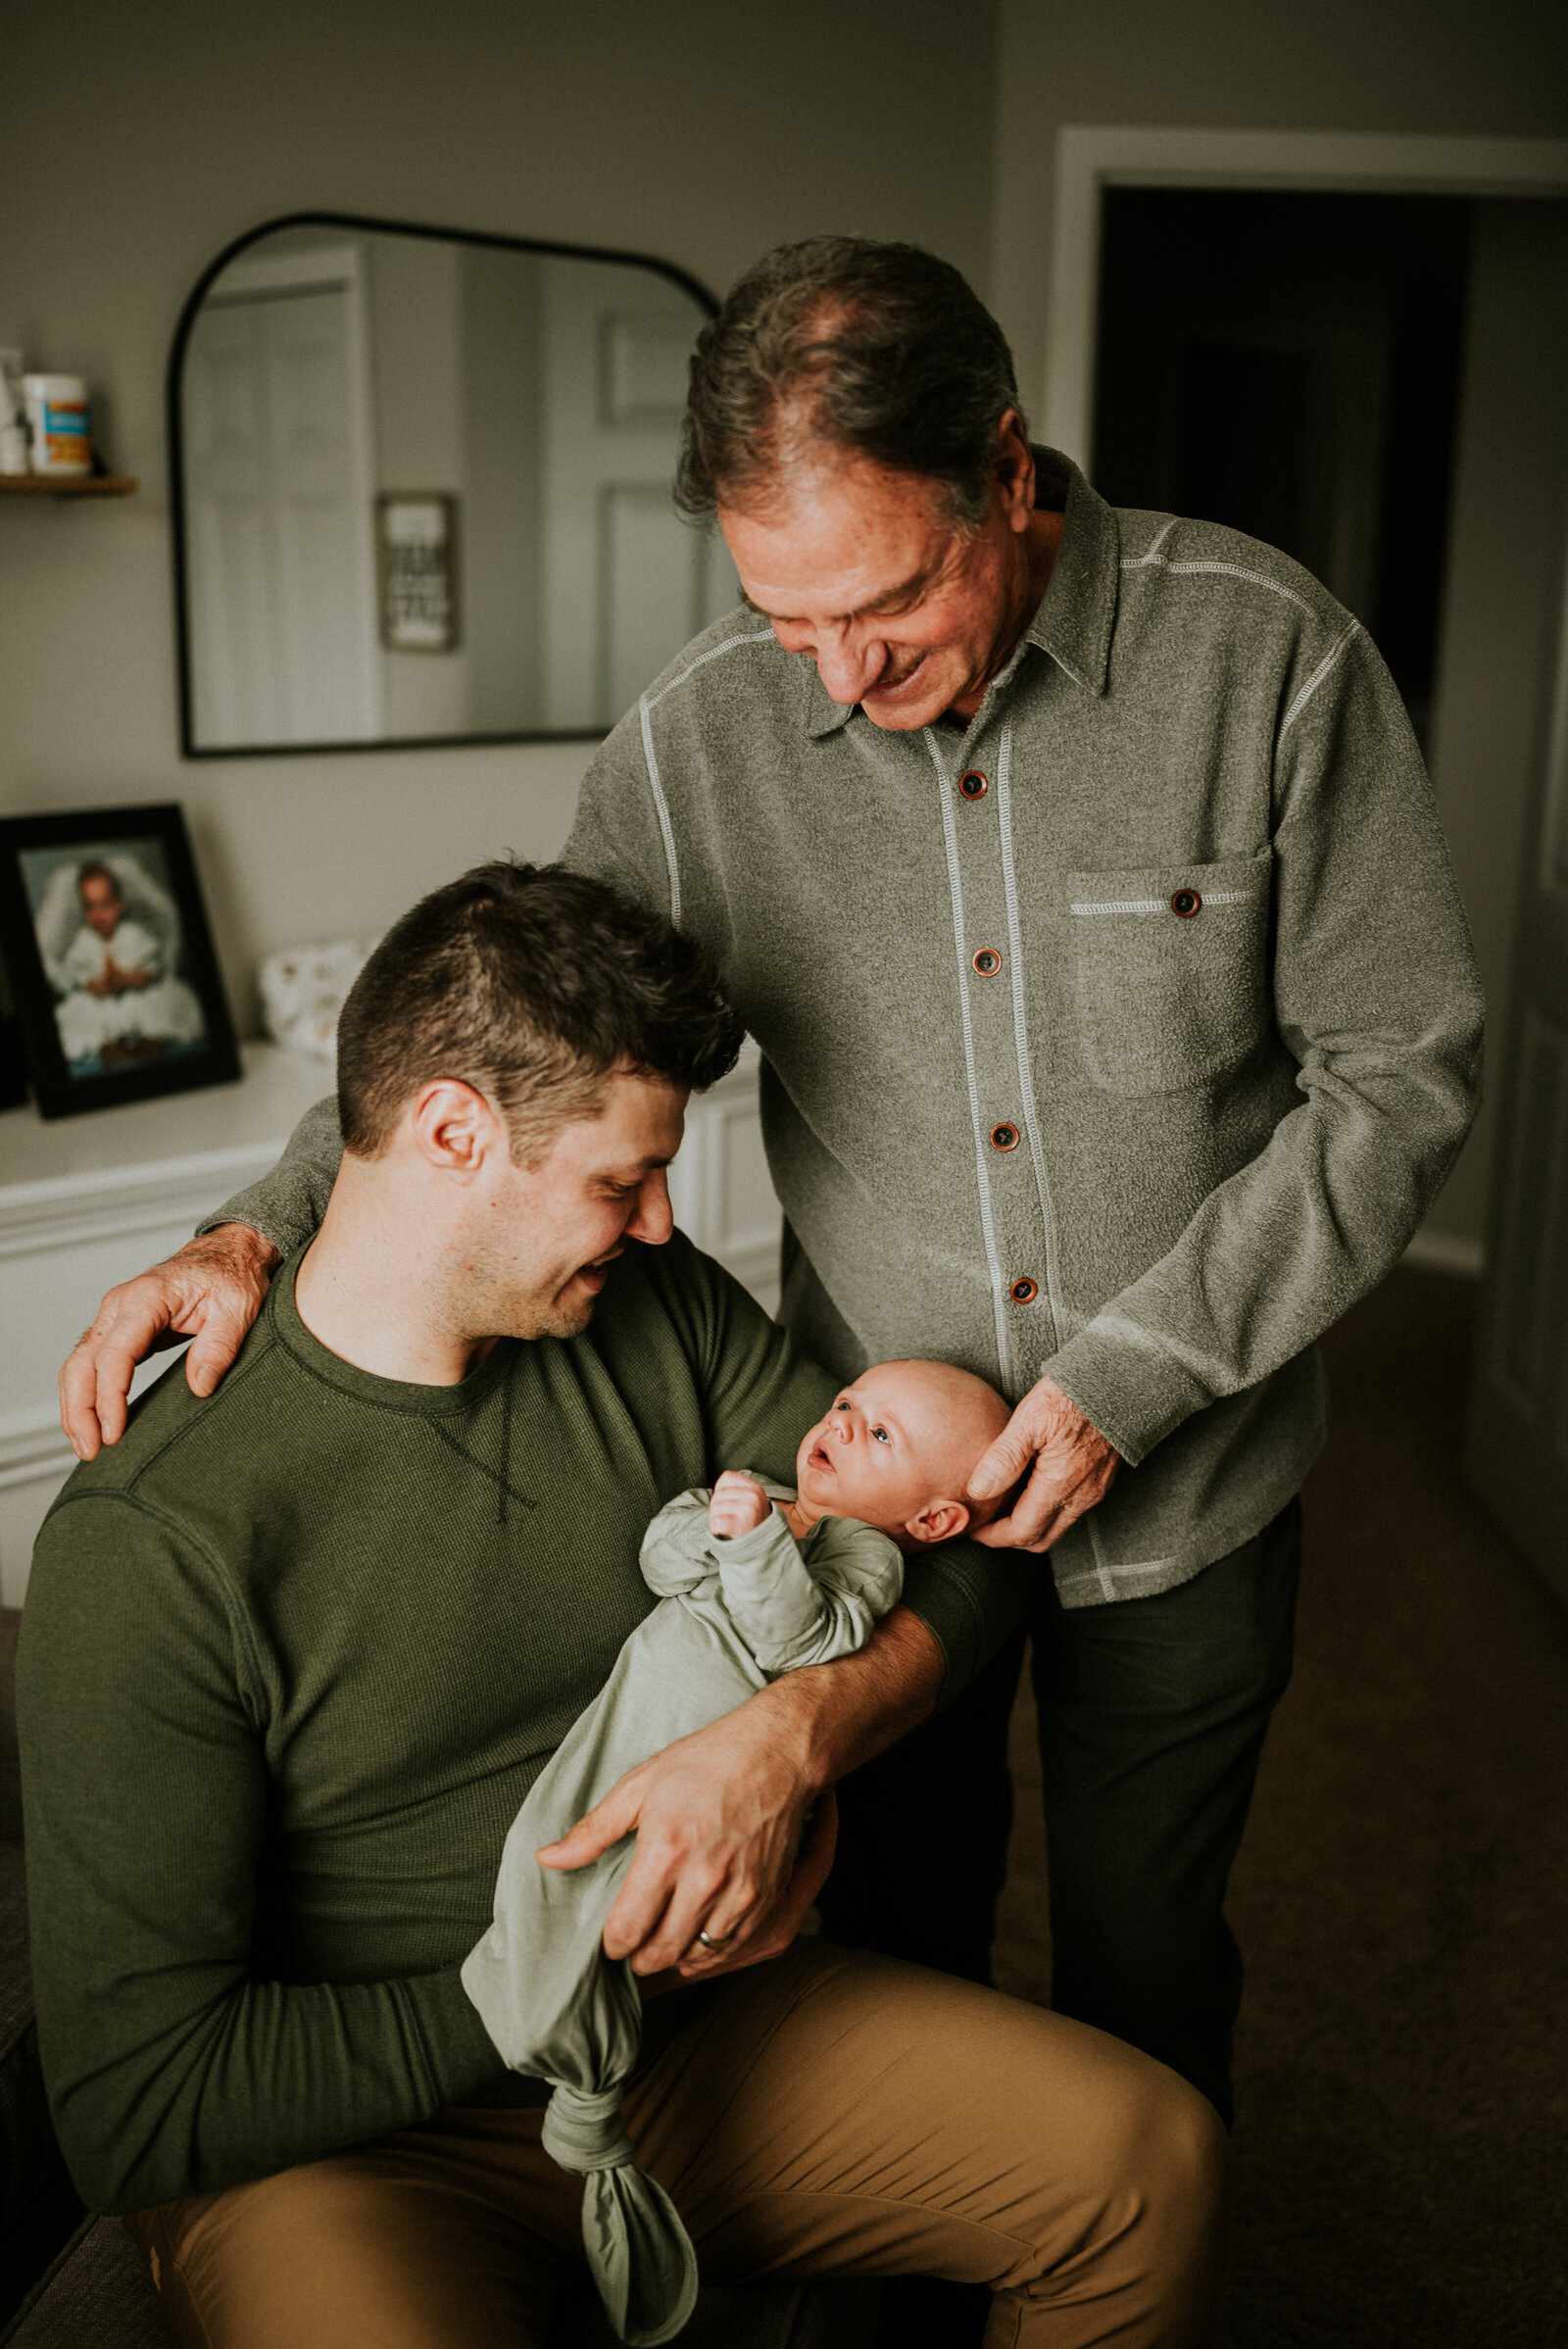 Begin your journey with heartfelt moments in the Twin Cities. Shannon Kathleen Photography captures the essence of newborn joy at home in St. Paul or Minneapolis. Schedule for timeless memories